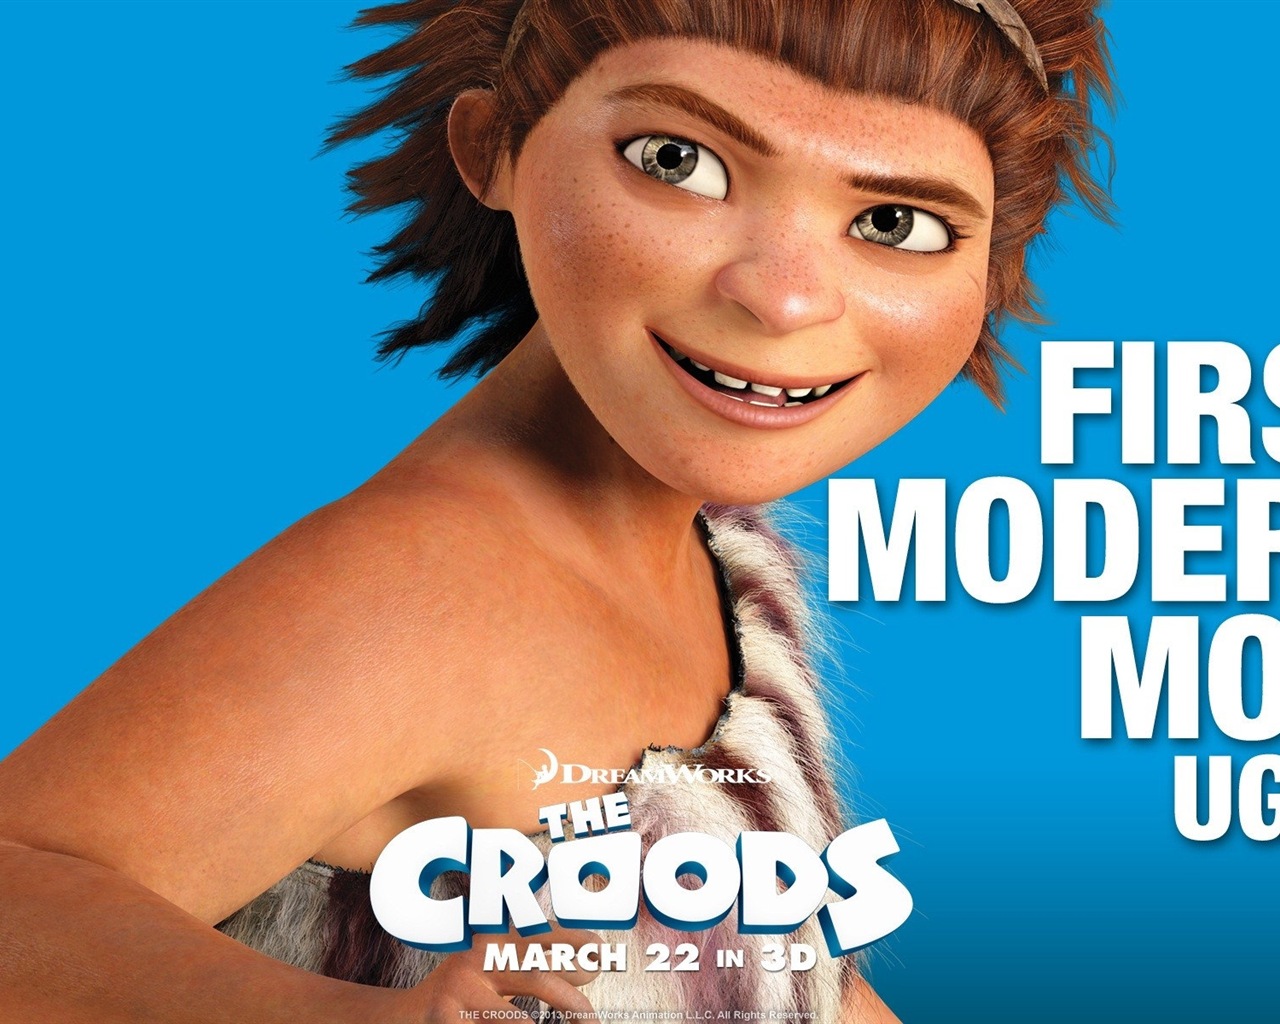 The Croods HD movie wallpapers #7 - 1280x1024